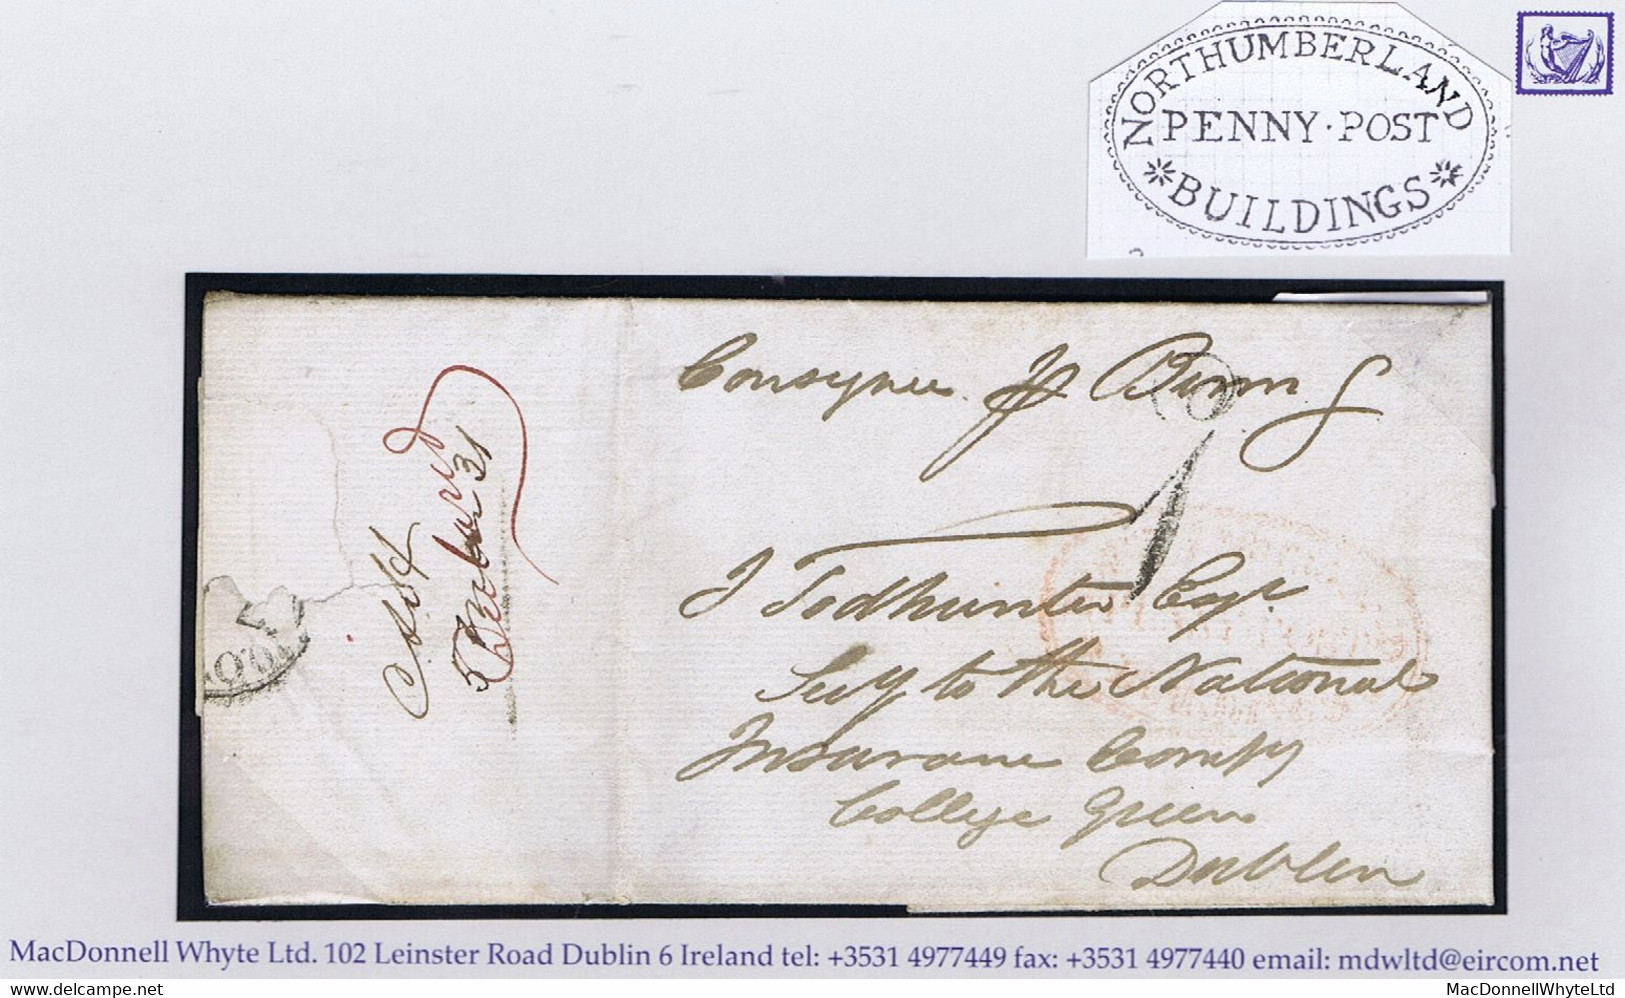 Ireland Maritime Dublin Penny Post 1831 Consignee's Letter Liverpool To Dublin NORTHUMBERLAND BUILDINGS PENNY POST - Prephilately